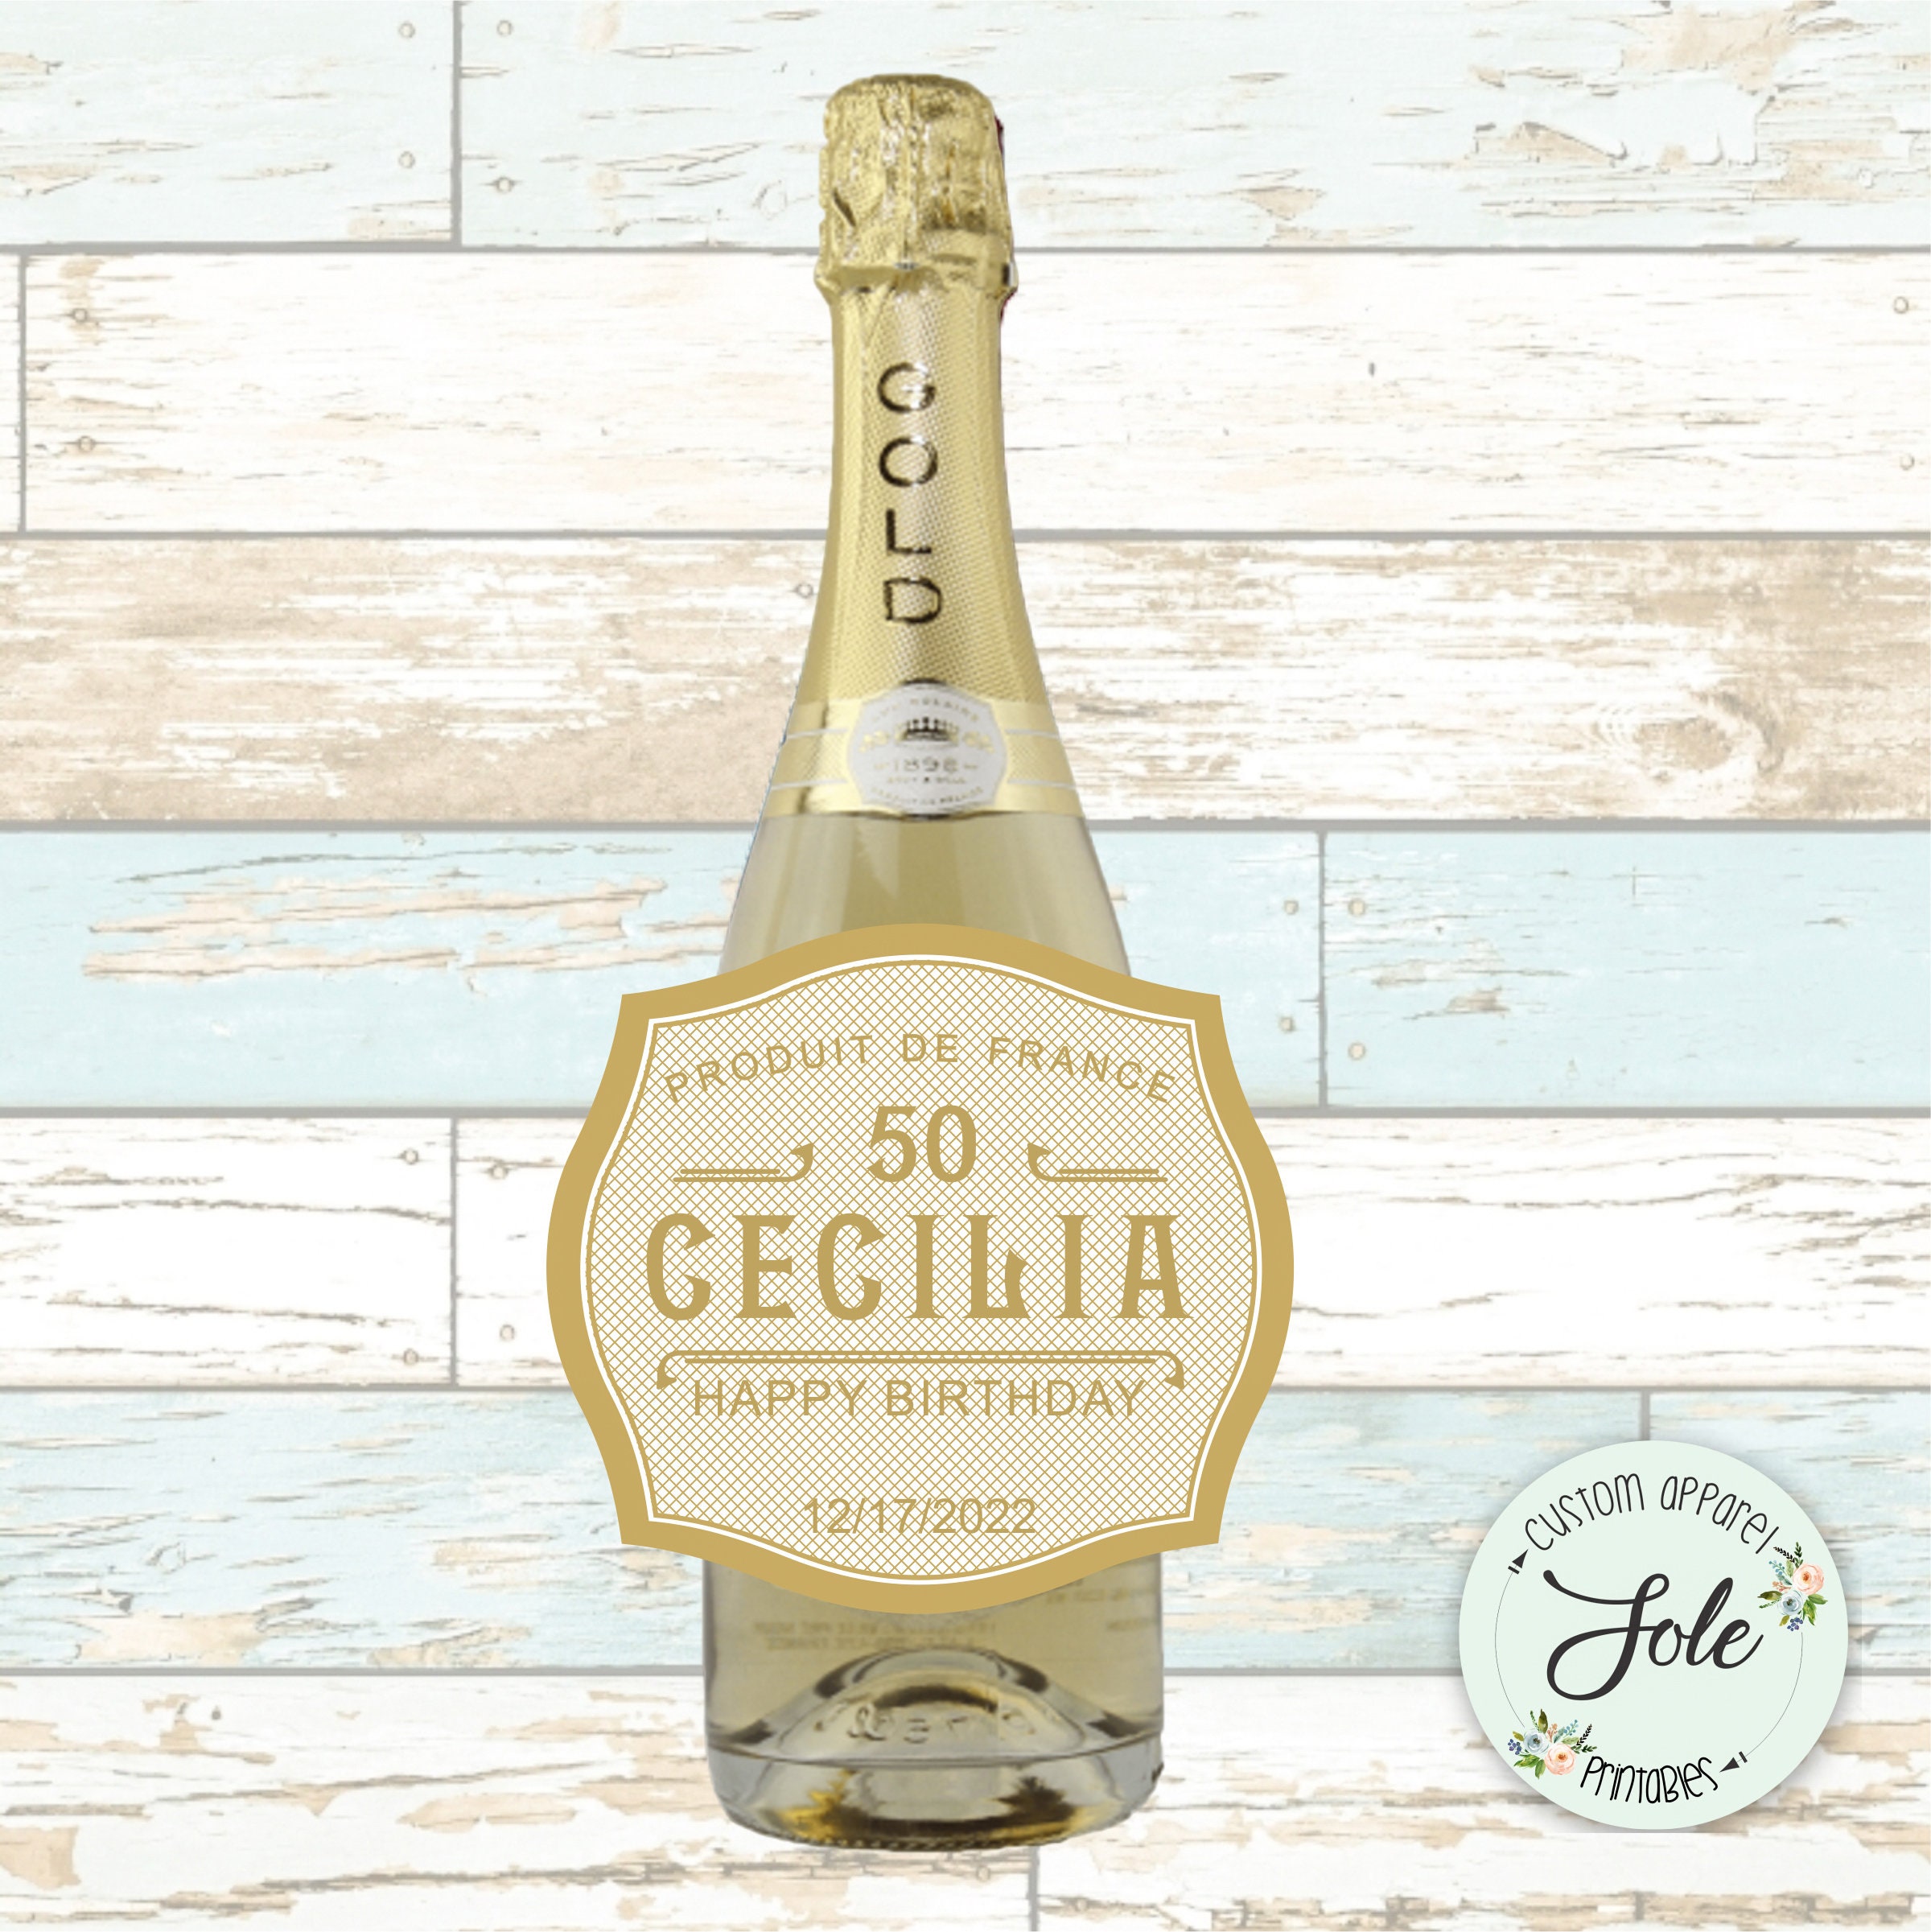 Personalized Champagne Label, Belaire Champagne, Birthday